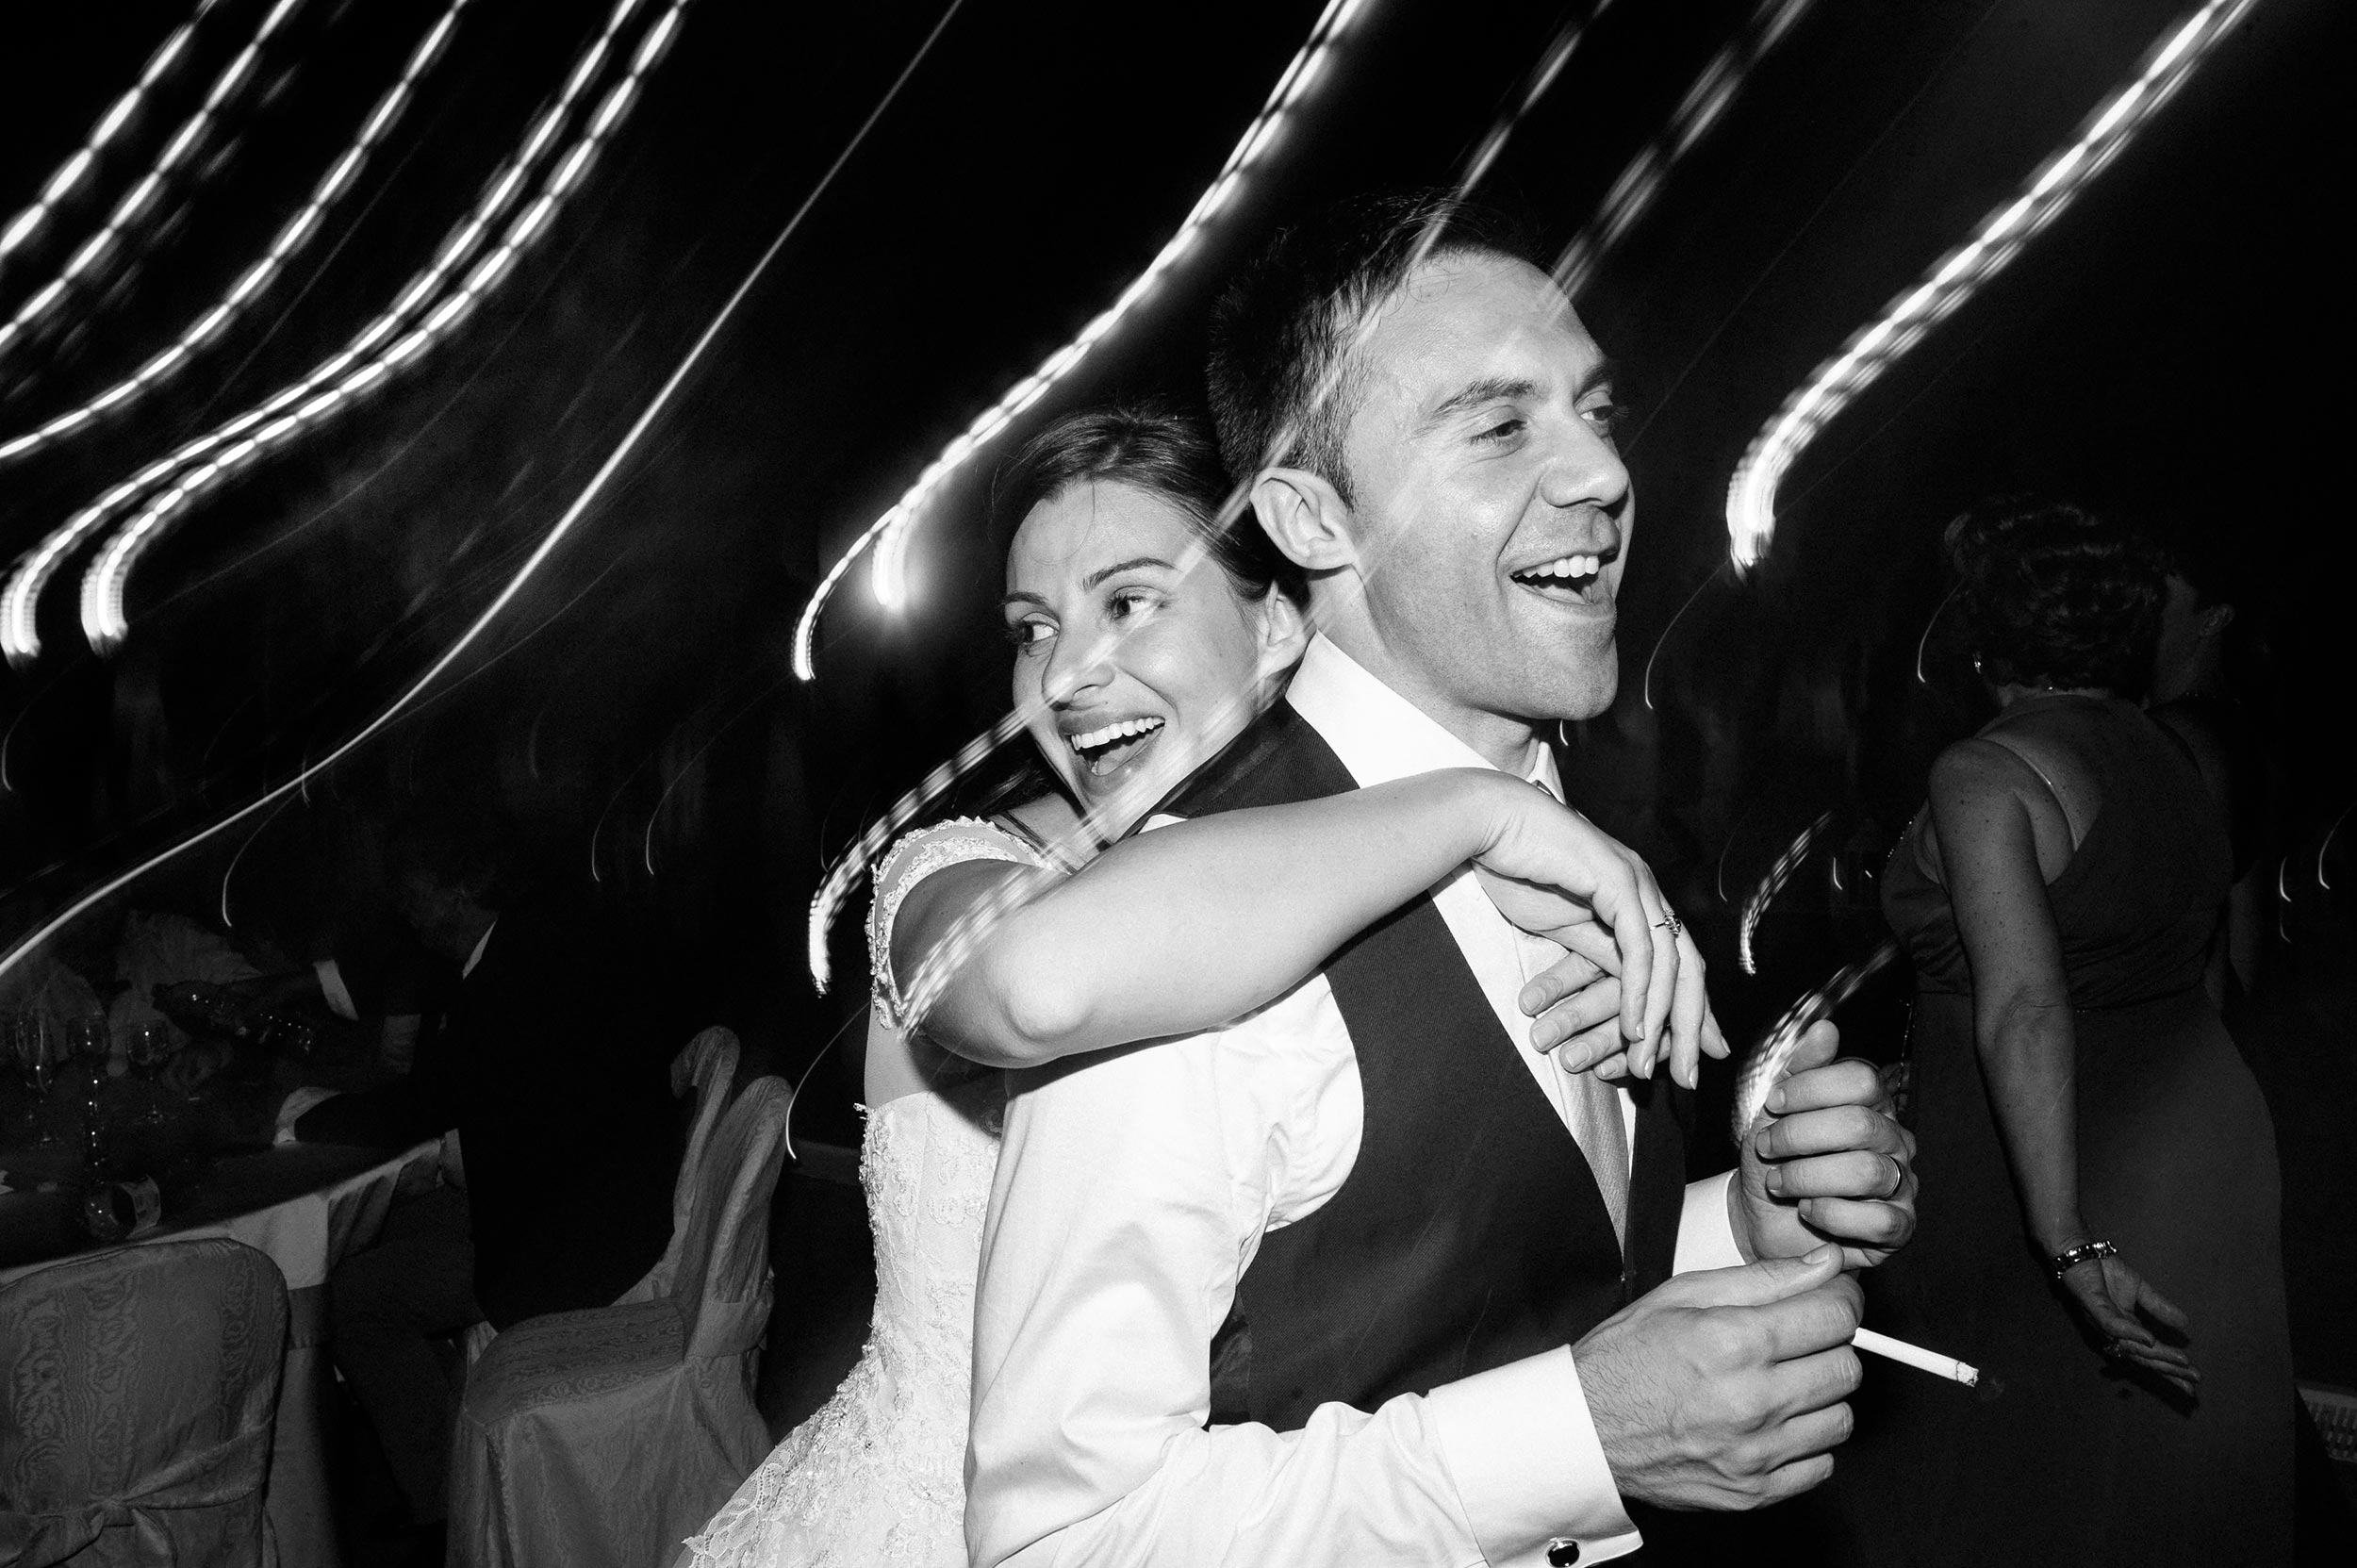 bride-hugs-the-groom-during-wedding-reception-black-and-white-wedding-photography.jpg